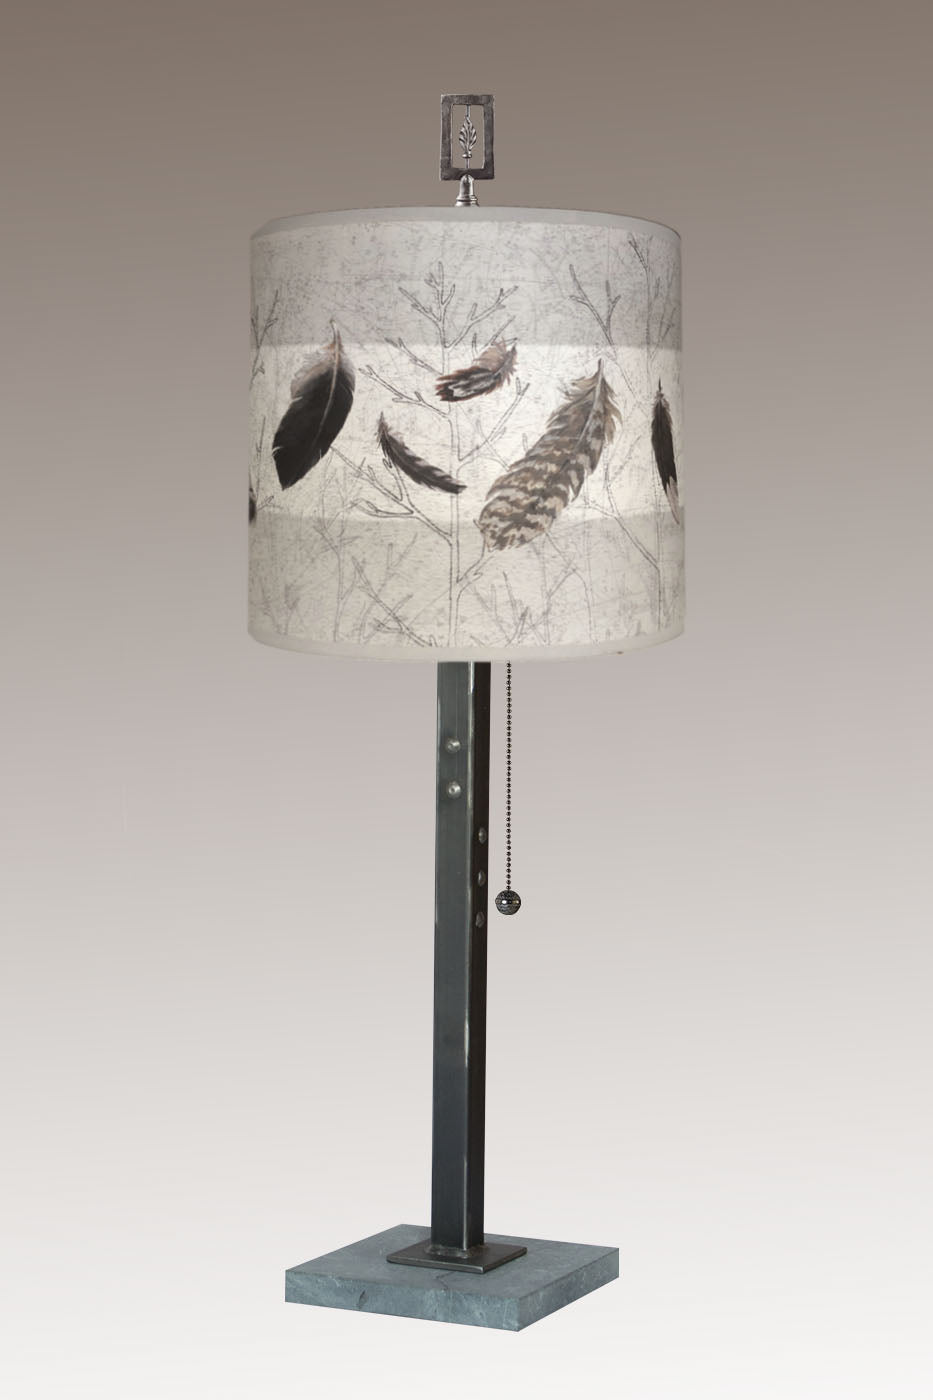 Janna Ugone & Co Table Lamps Steel Table Lamp with Medium Drum Shade in Feathers in Pebble